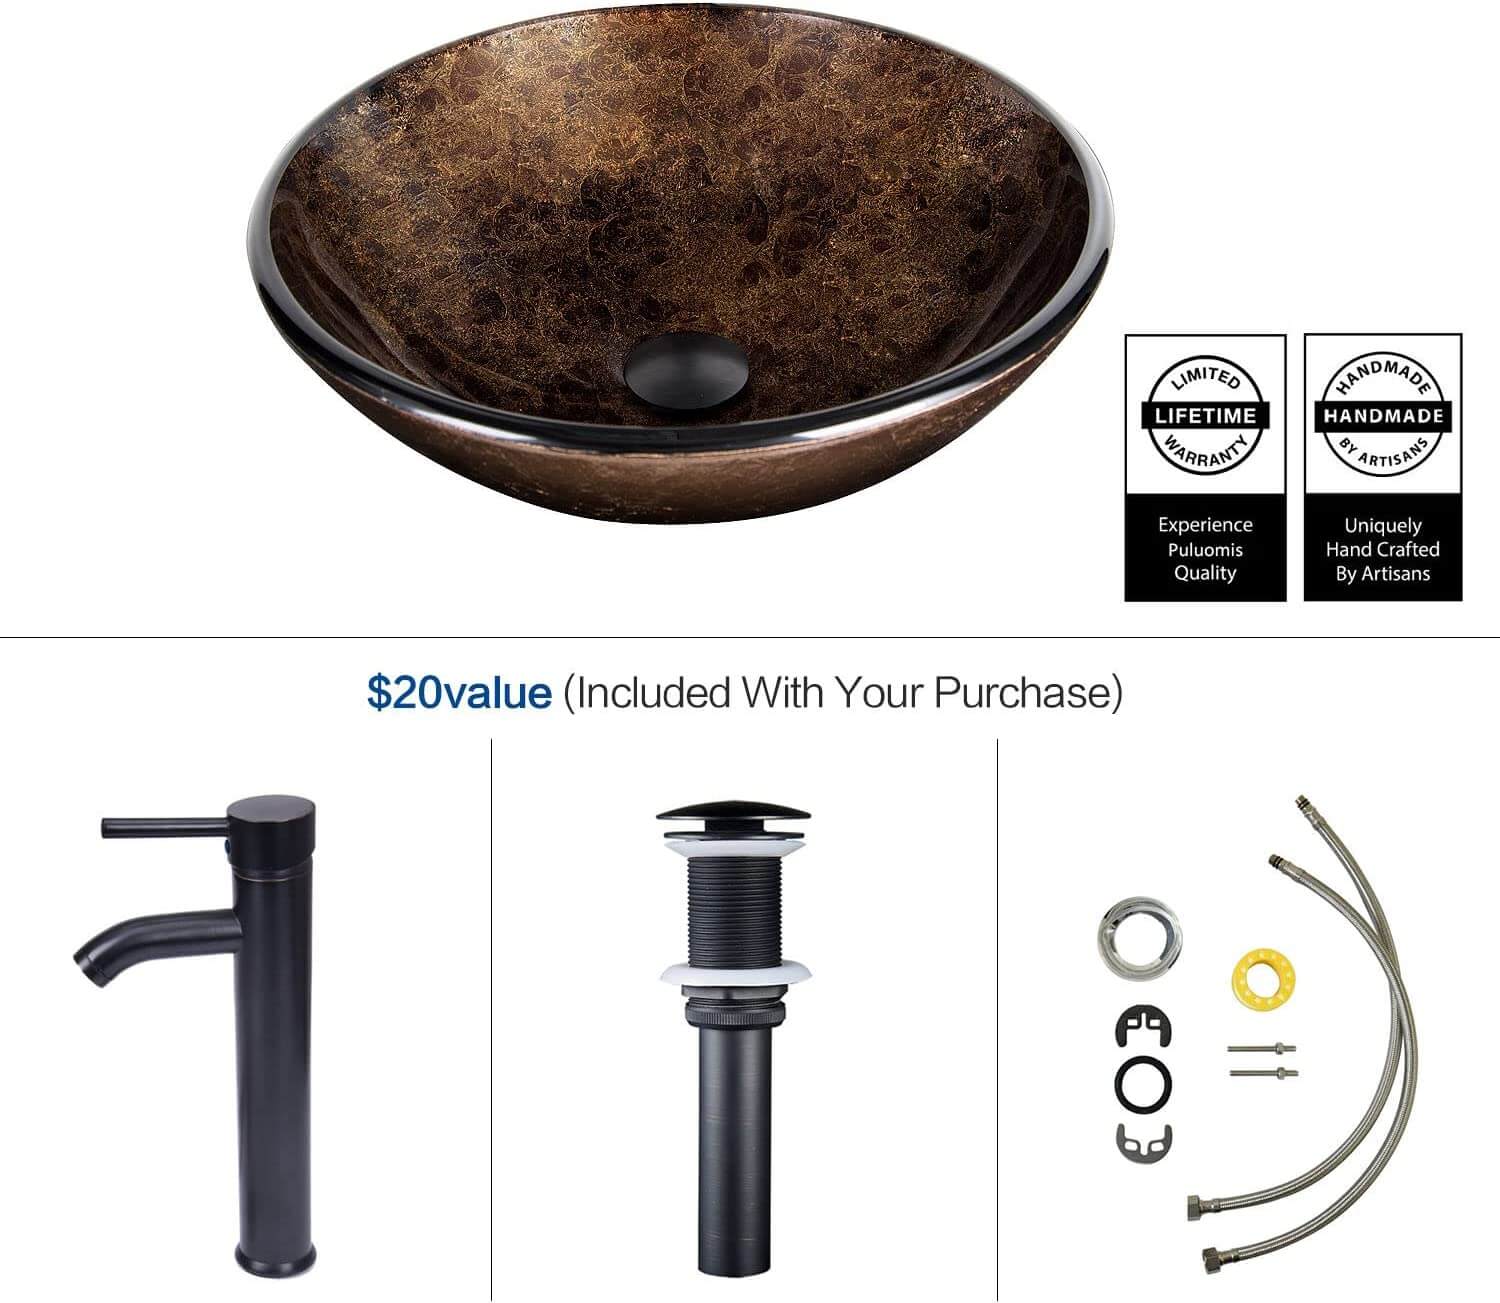 Elecwish brown glass sink included parts